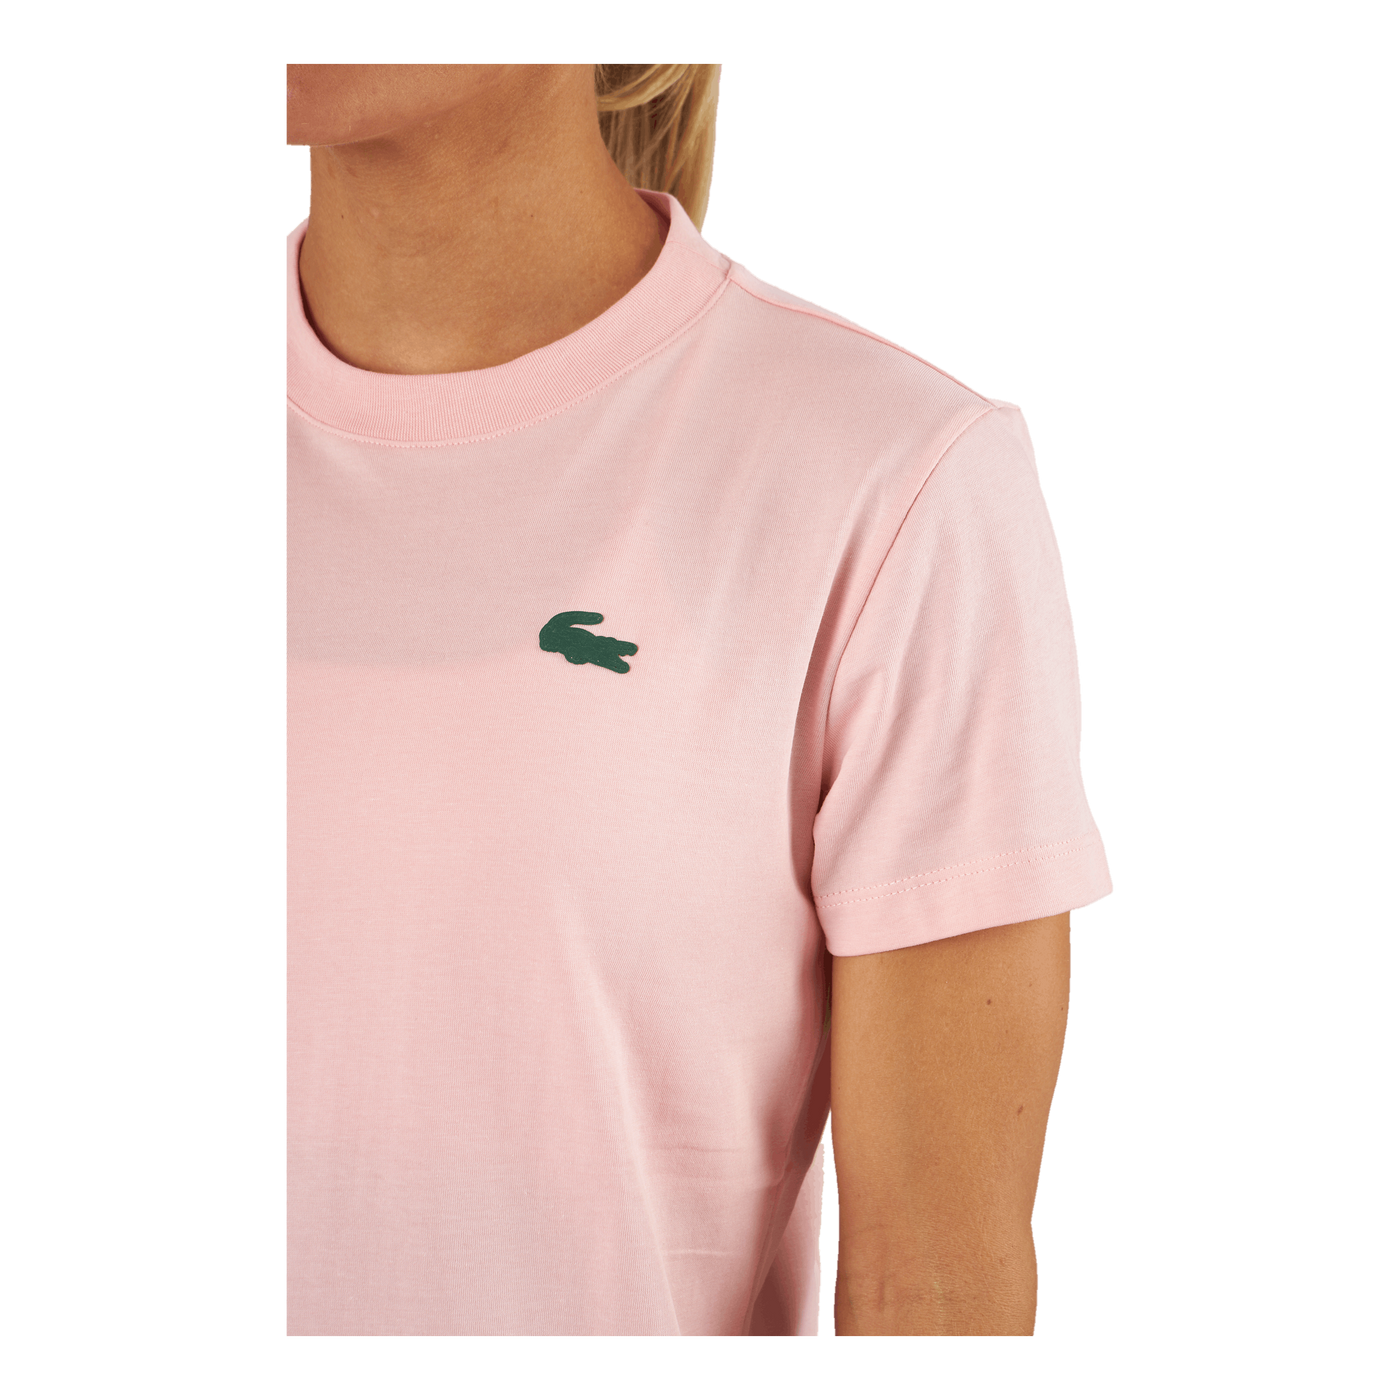 Lacoste T-shirt Waterlily